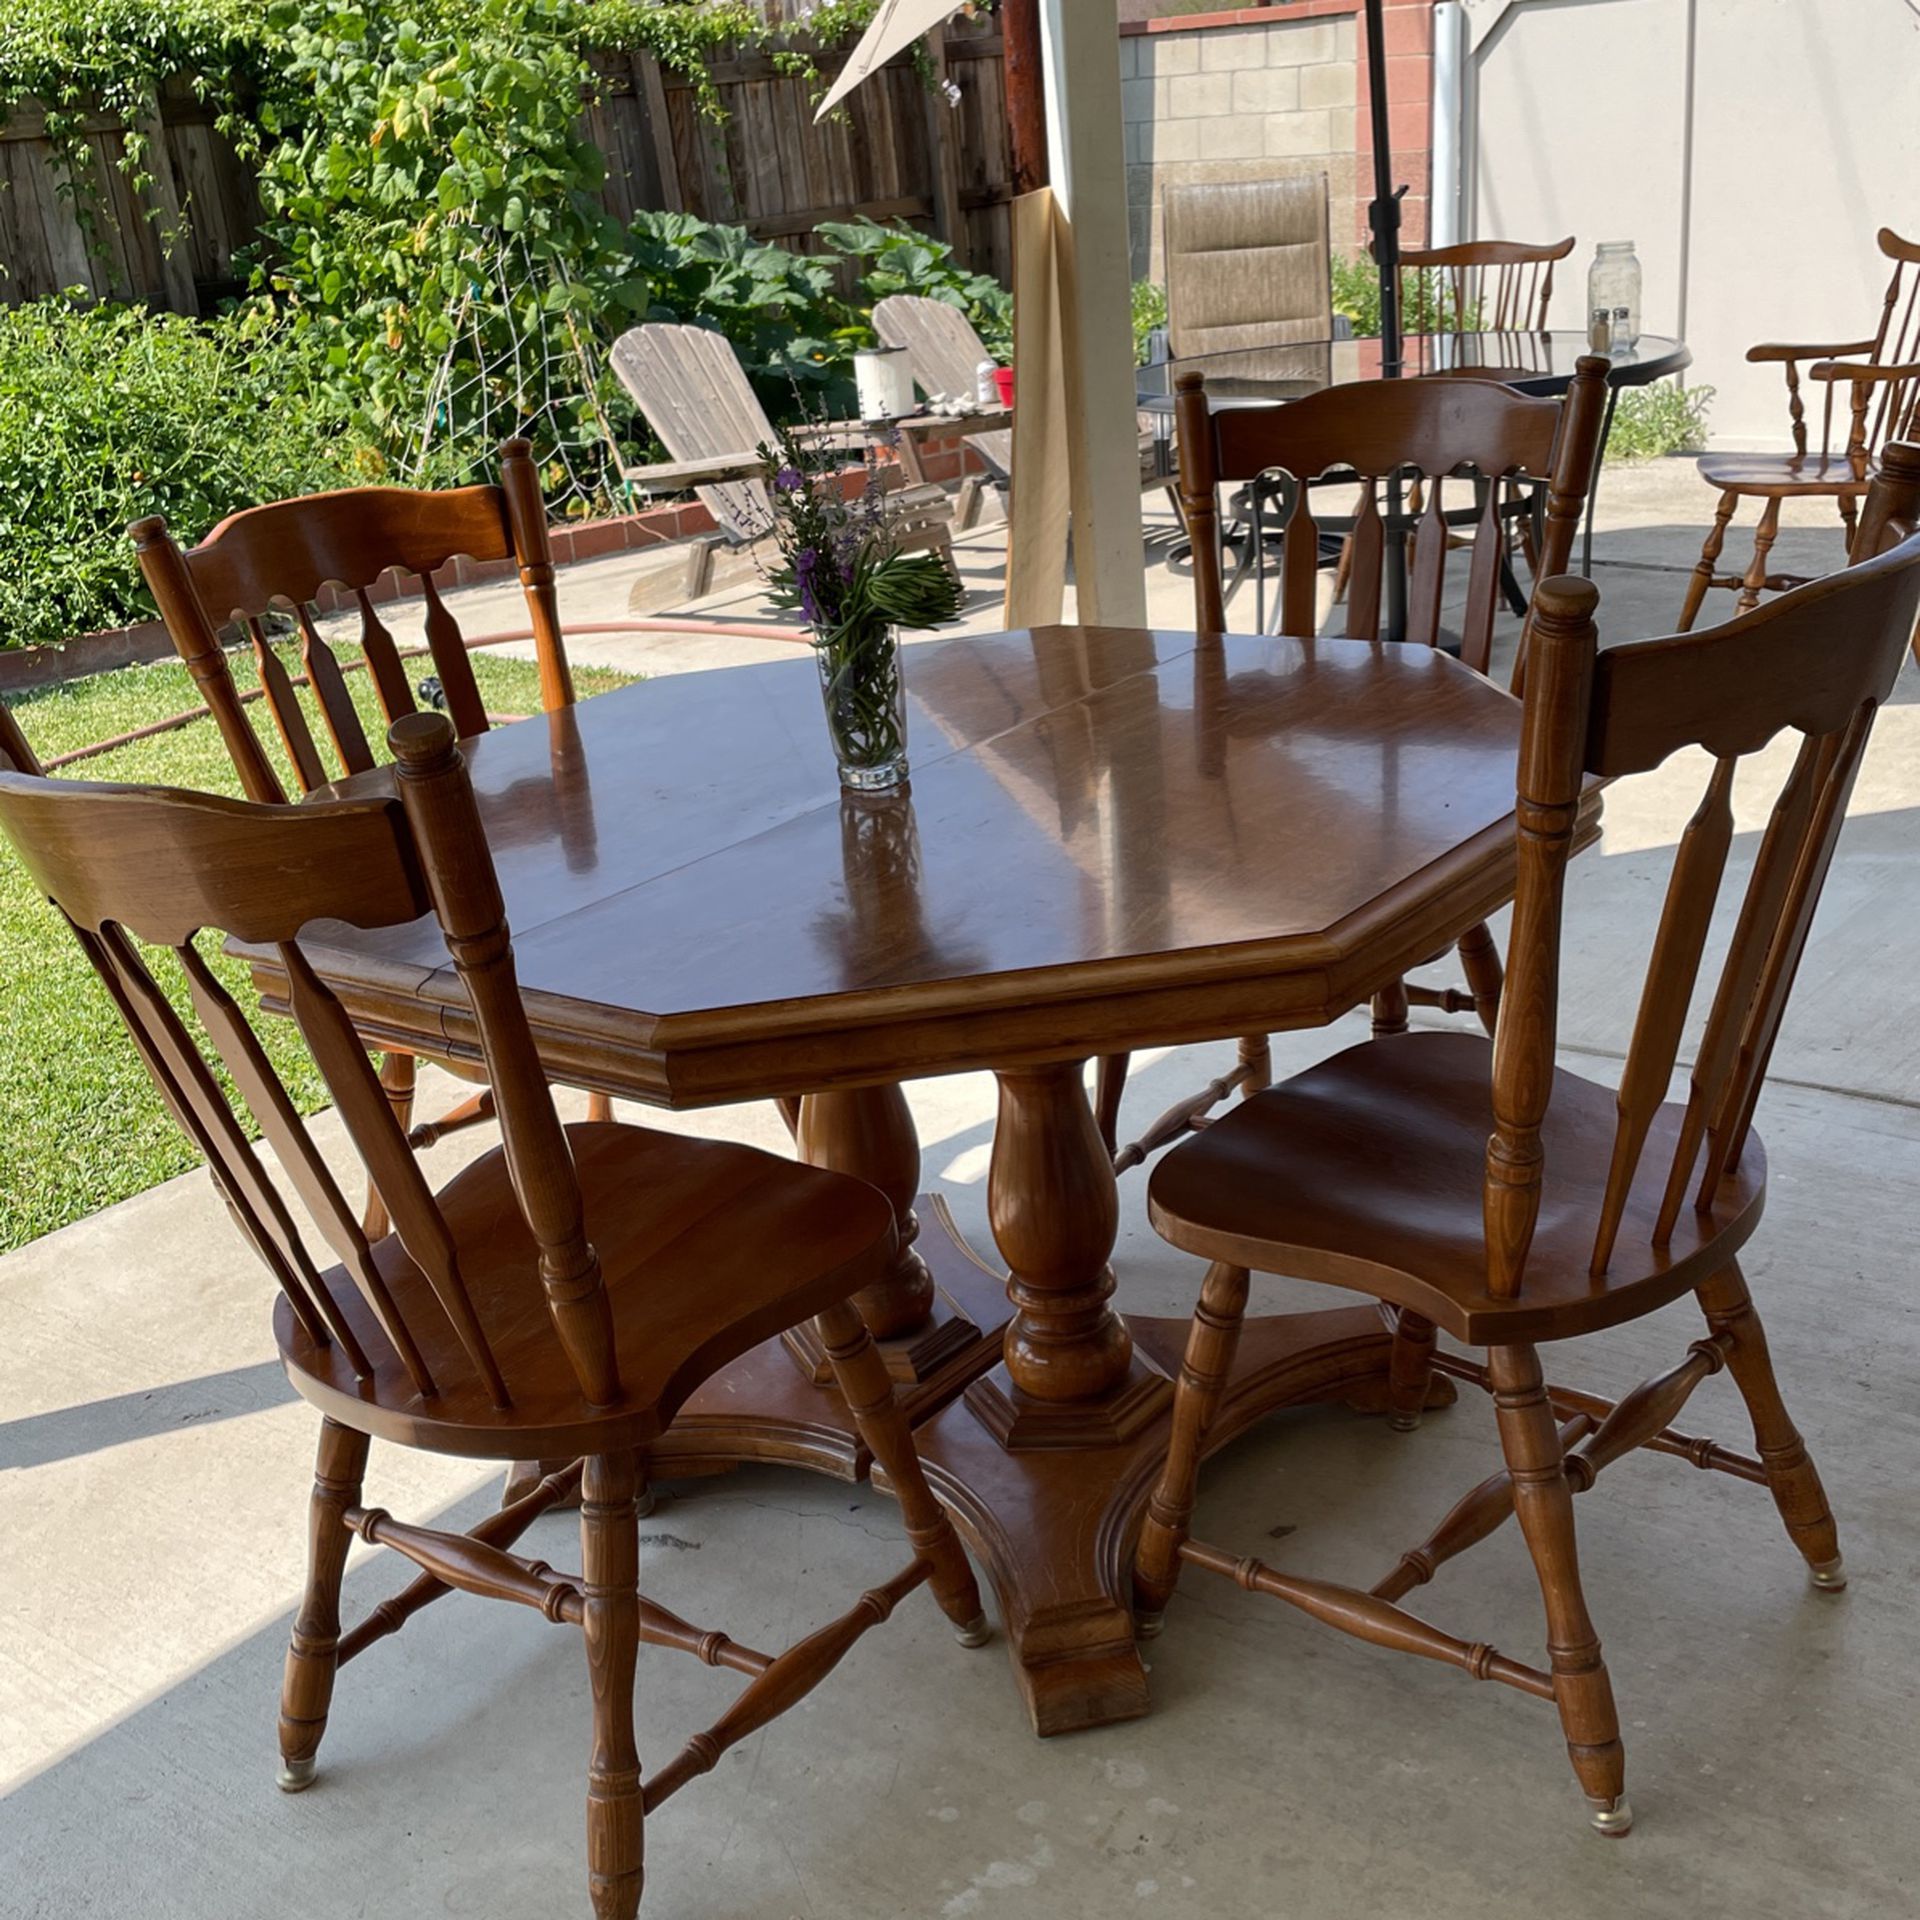 Great Dining Room Table With 6 Chairs  